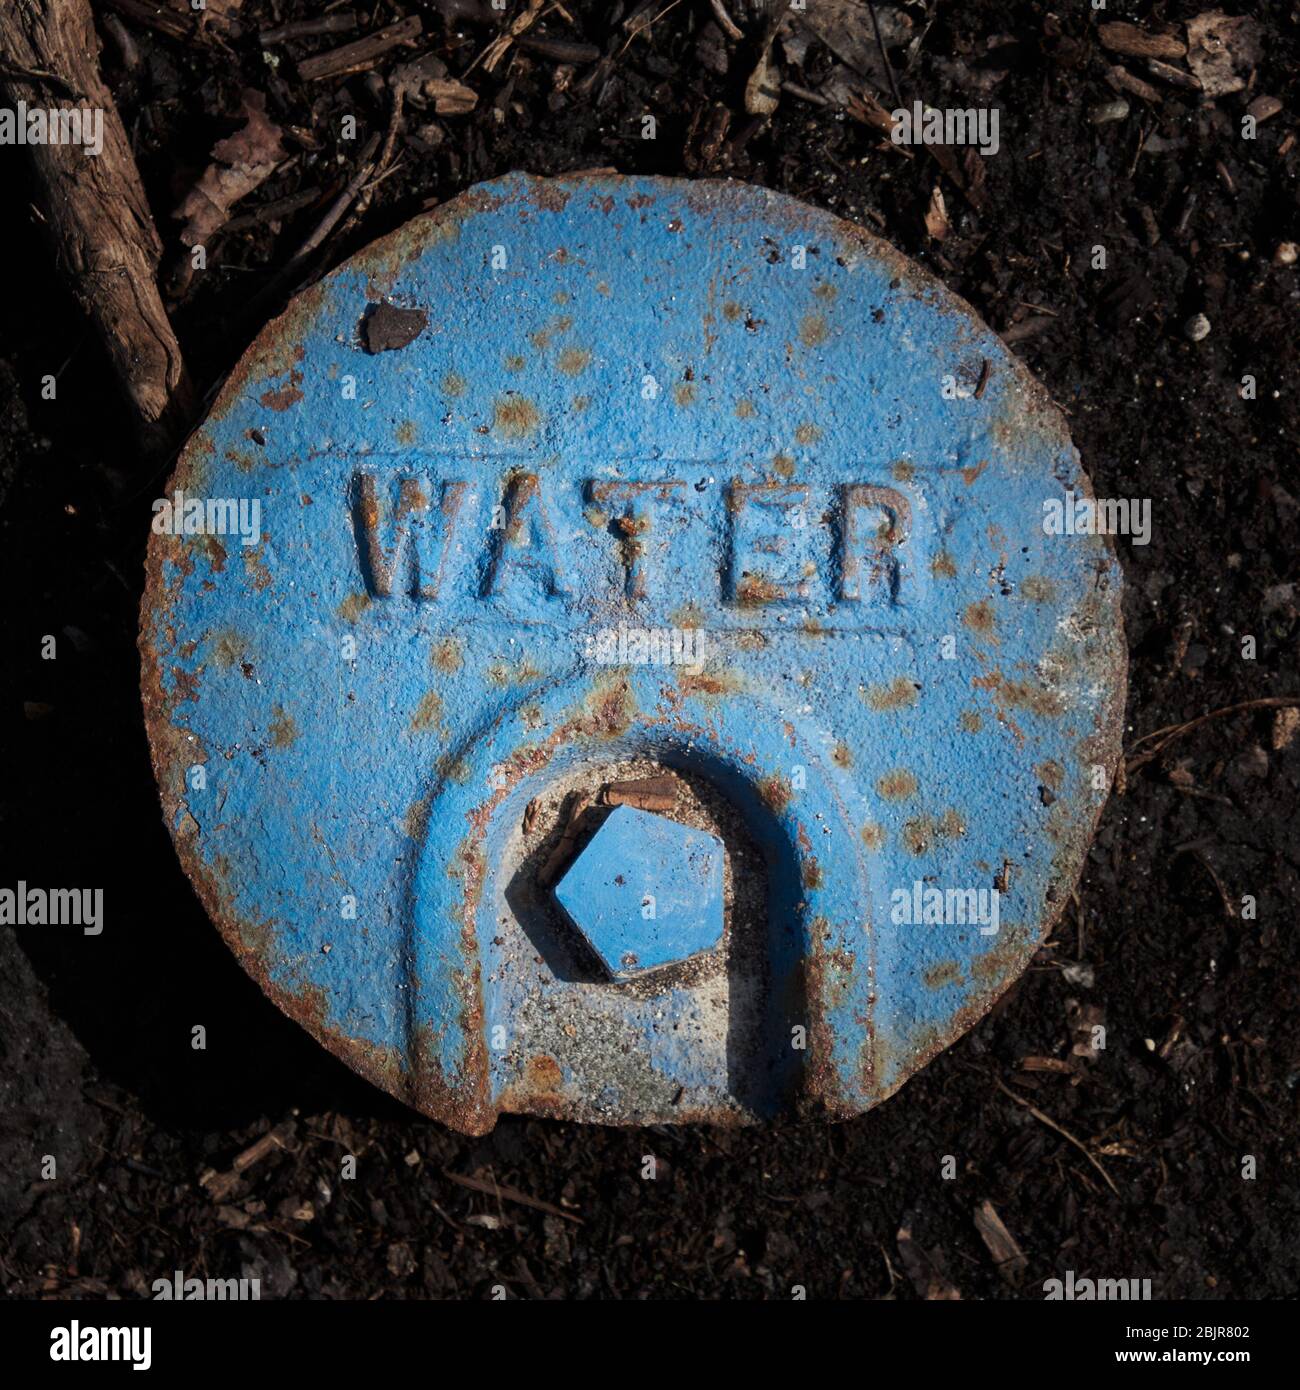 Color photograph of blue Round cover of municipal water supply to residential or commercial establishment, covering below ground shut off valve. Stock Photo